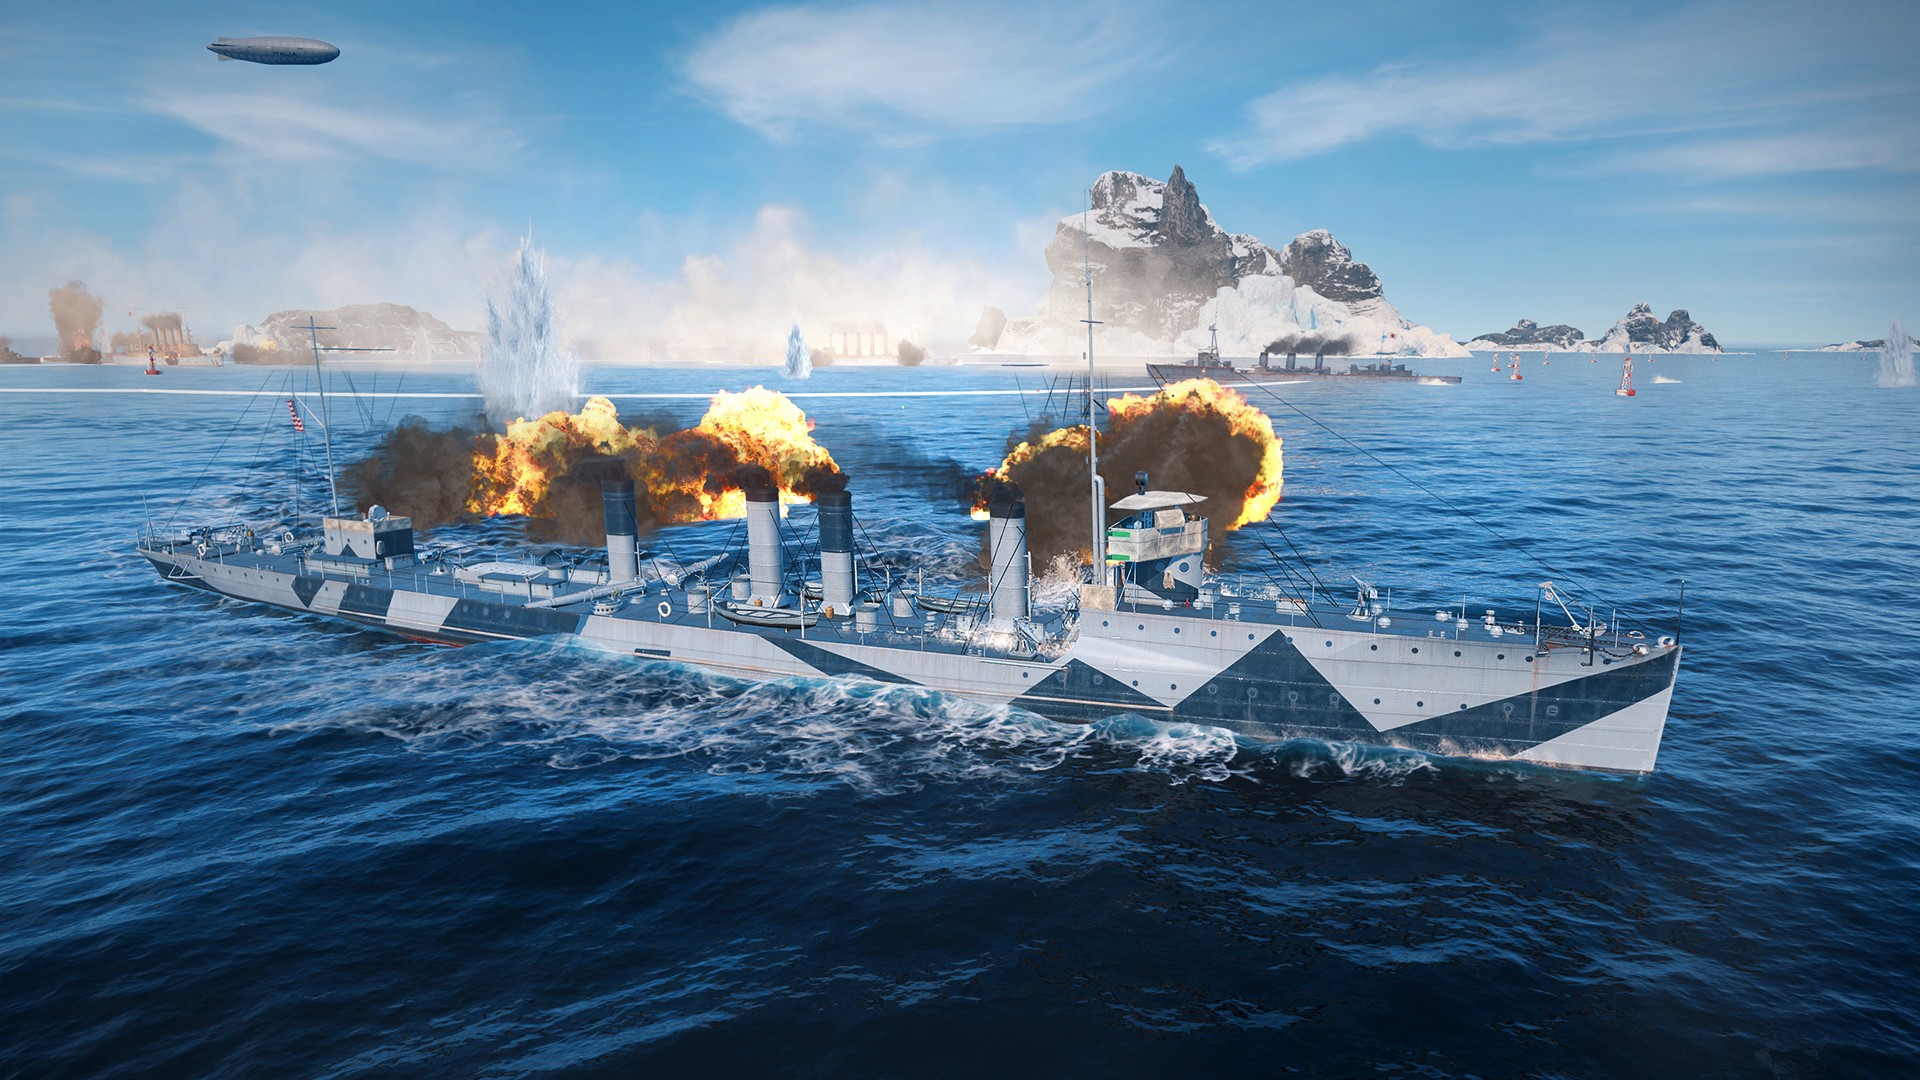 world of warships: legends ps4 update